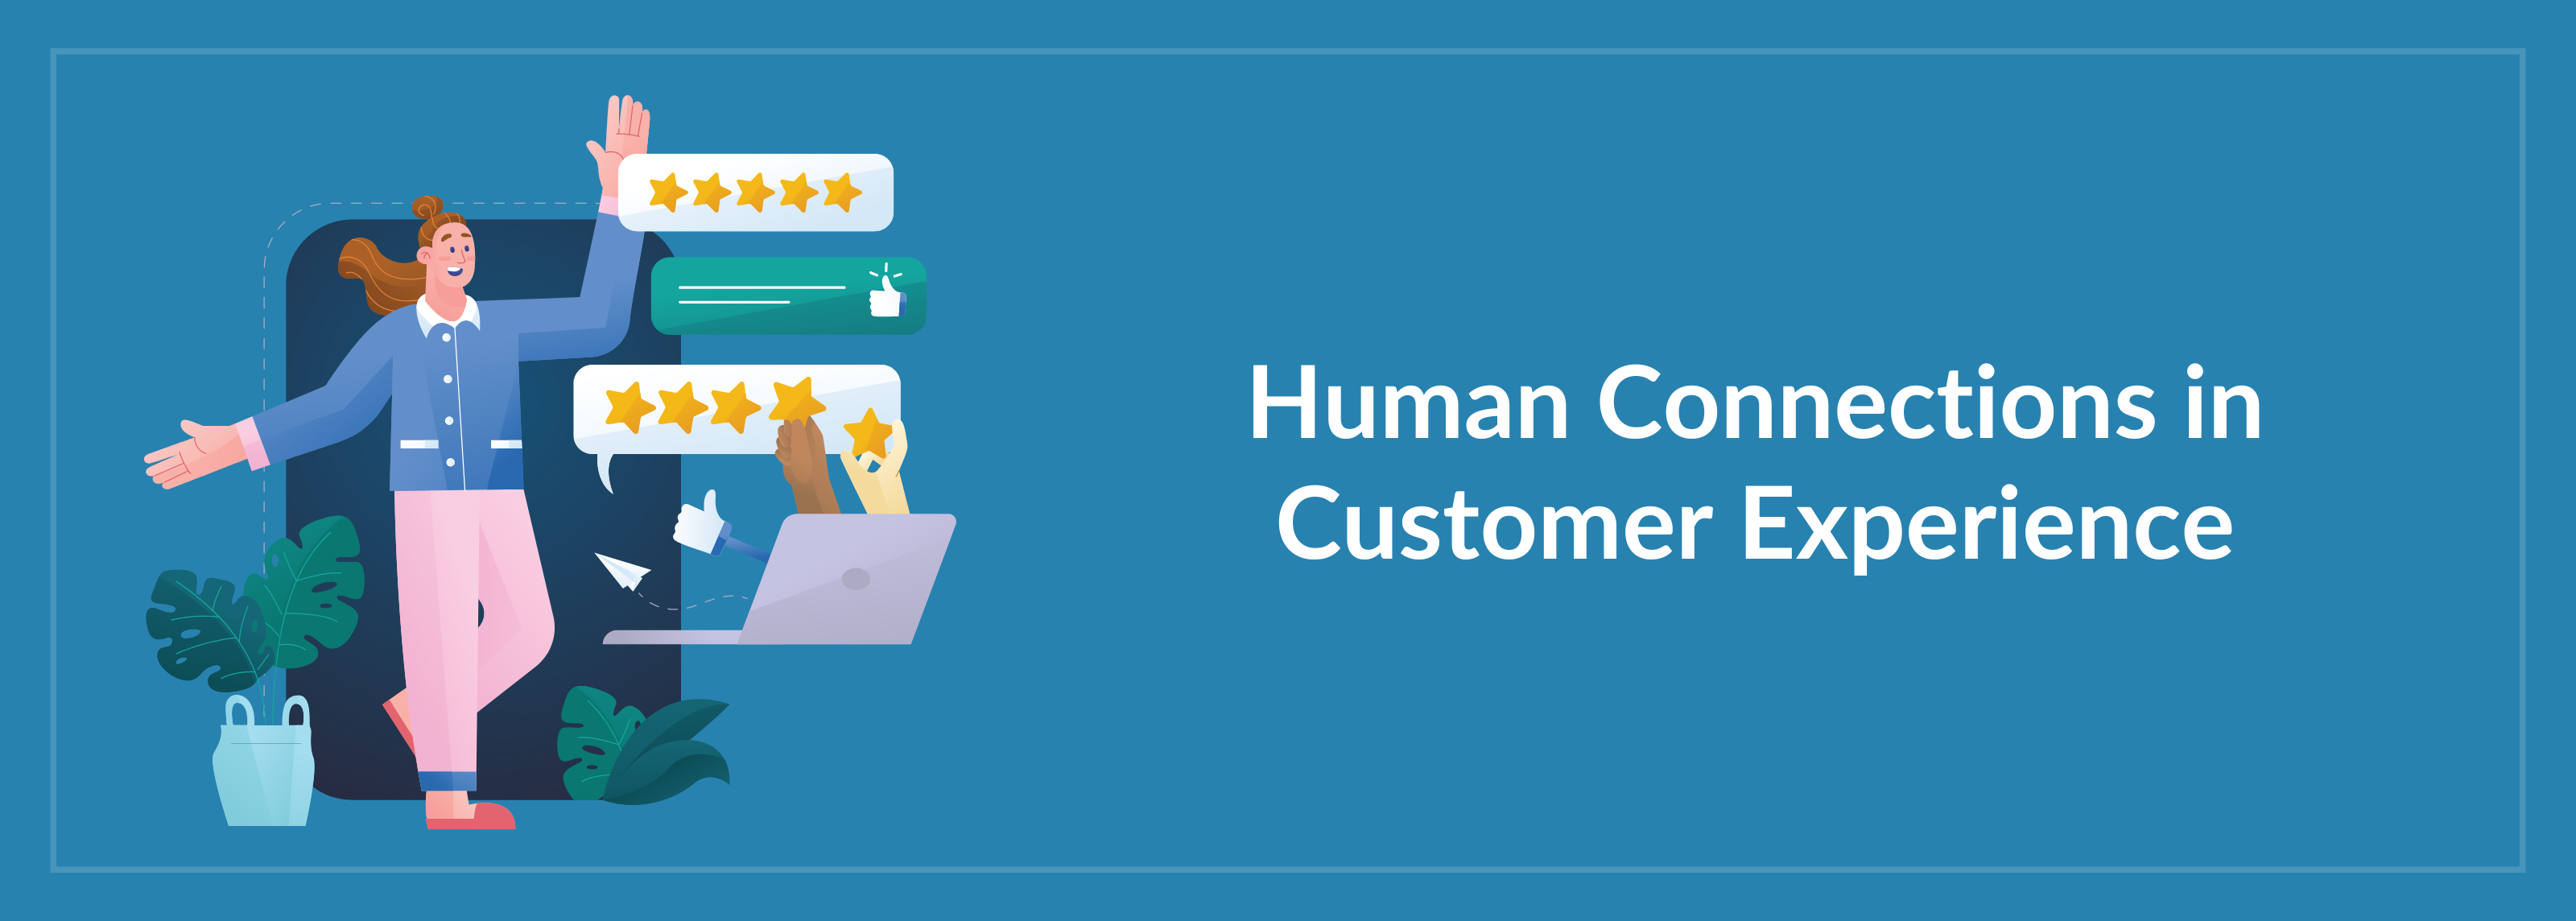 Human Connections in Customer Experience